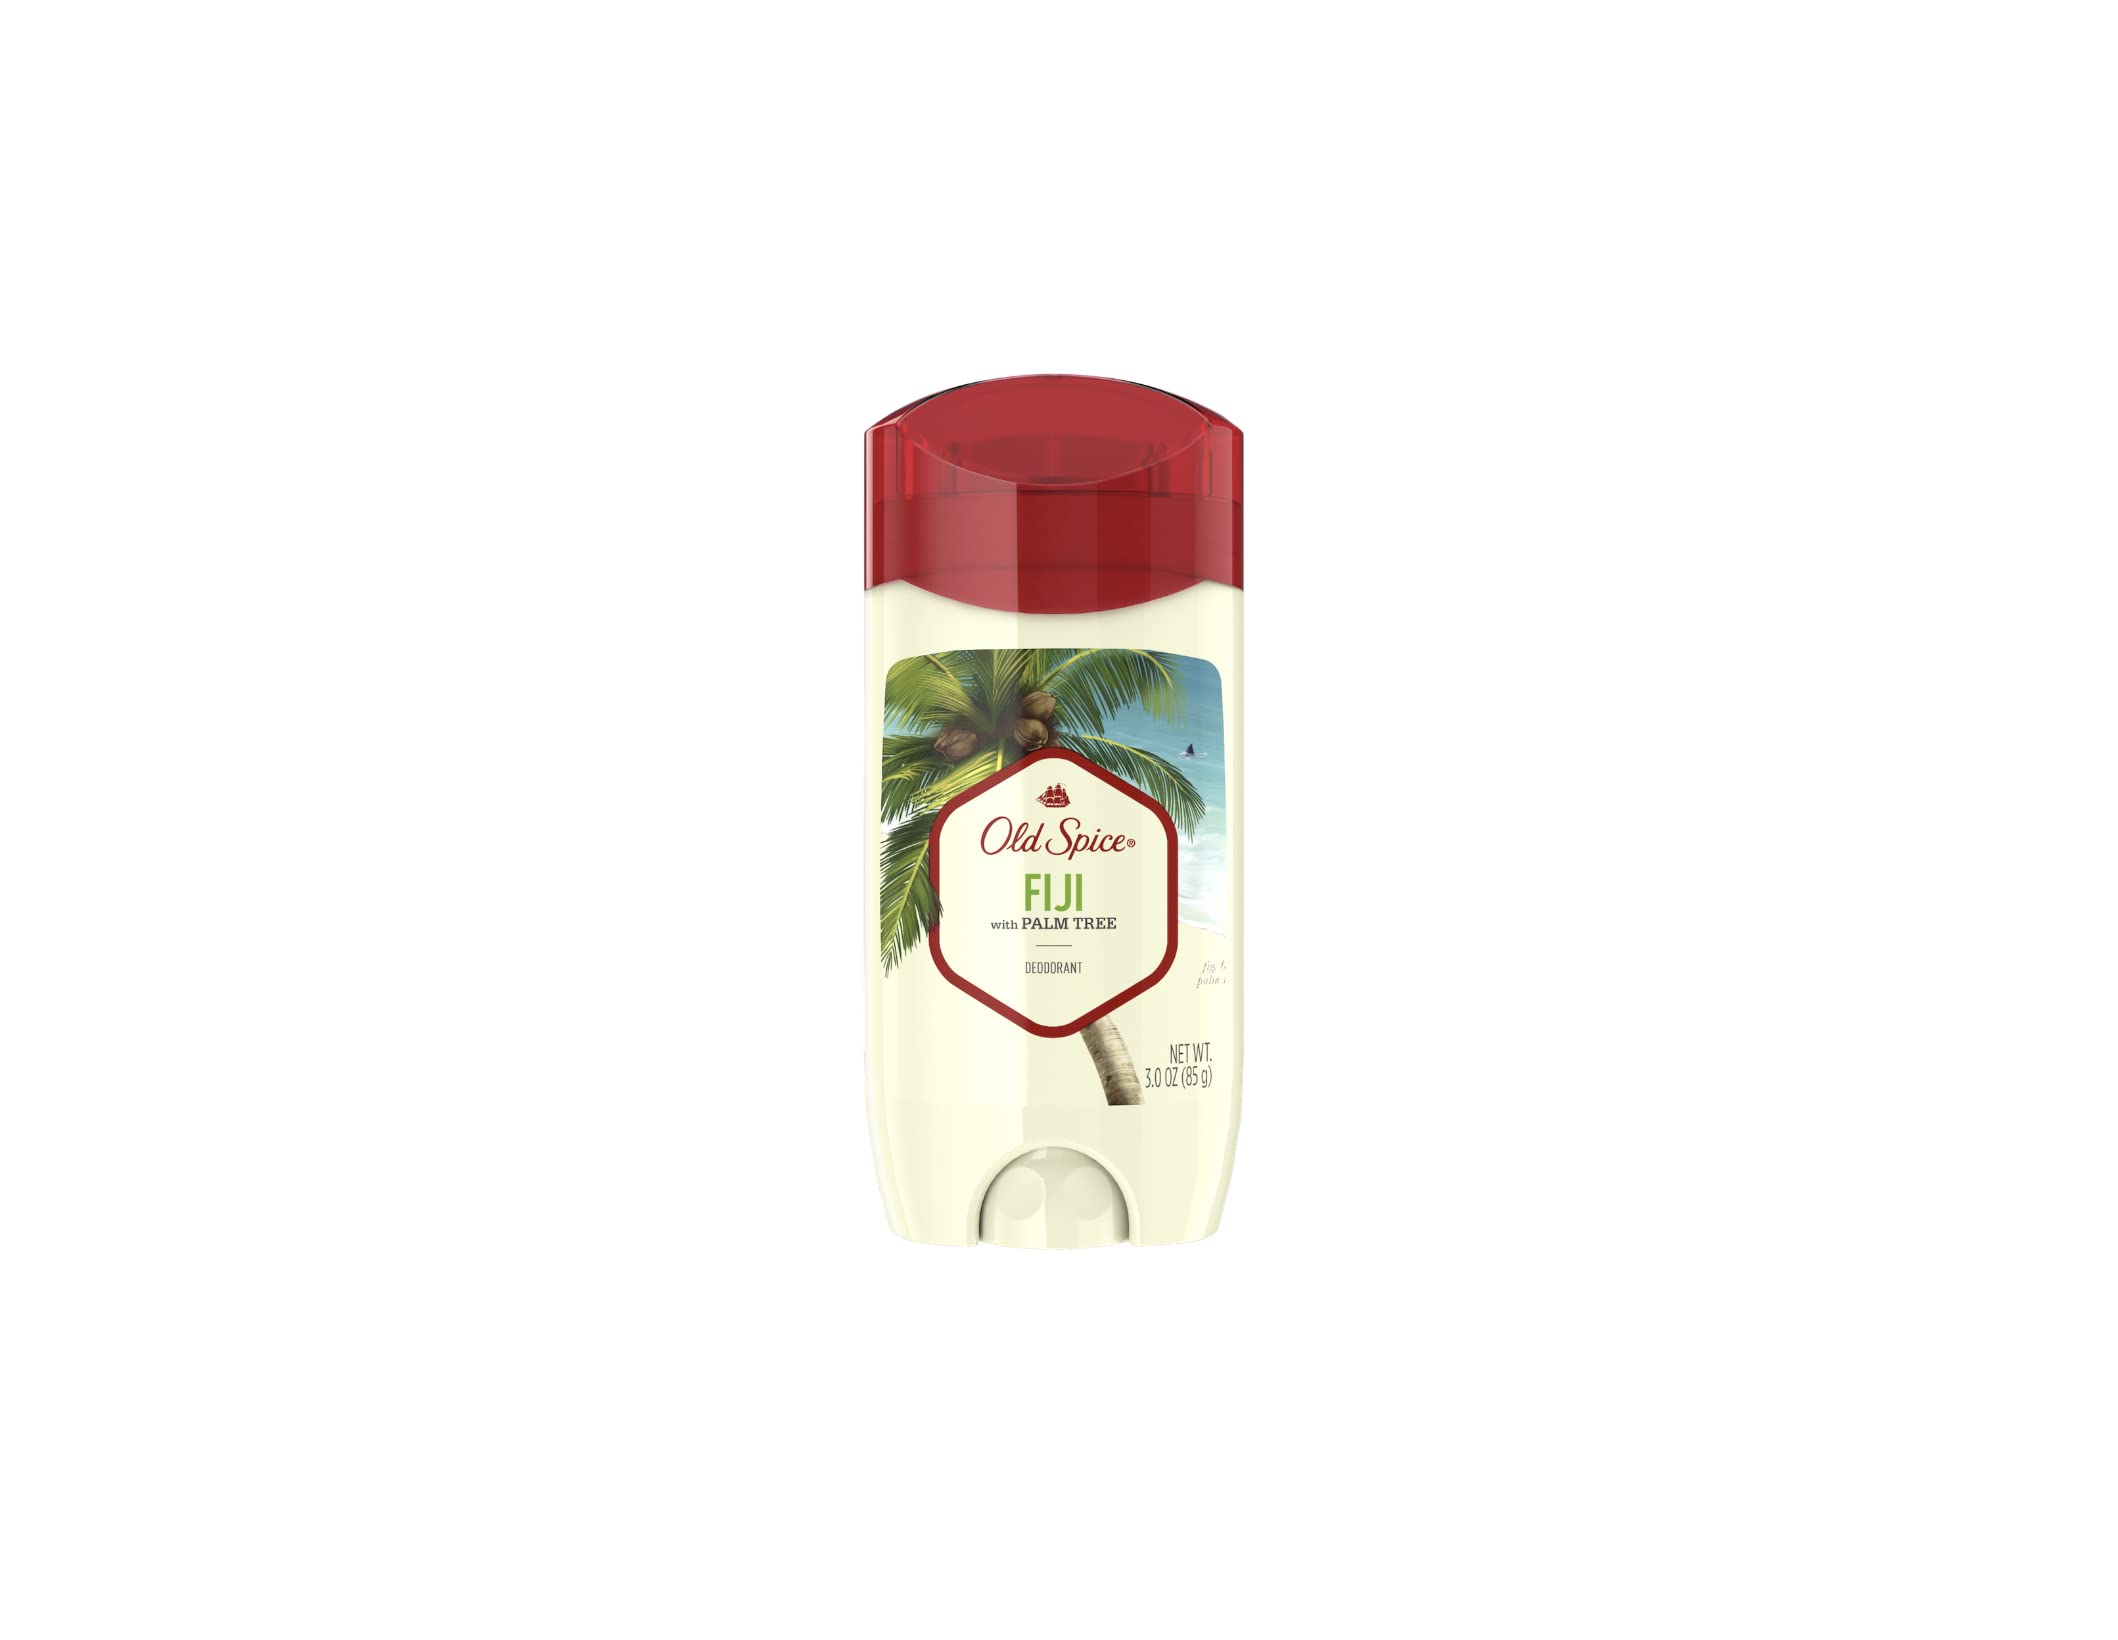 Old Spice Invisible Solid Antiperspirant Deodorant for Men Fiji with Palm Tree Scent Inspired by Nature, 2.25 oz